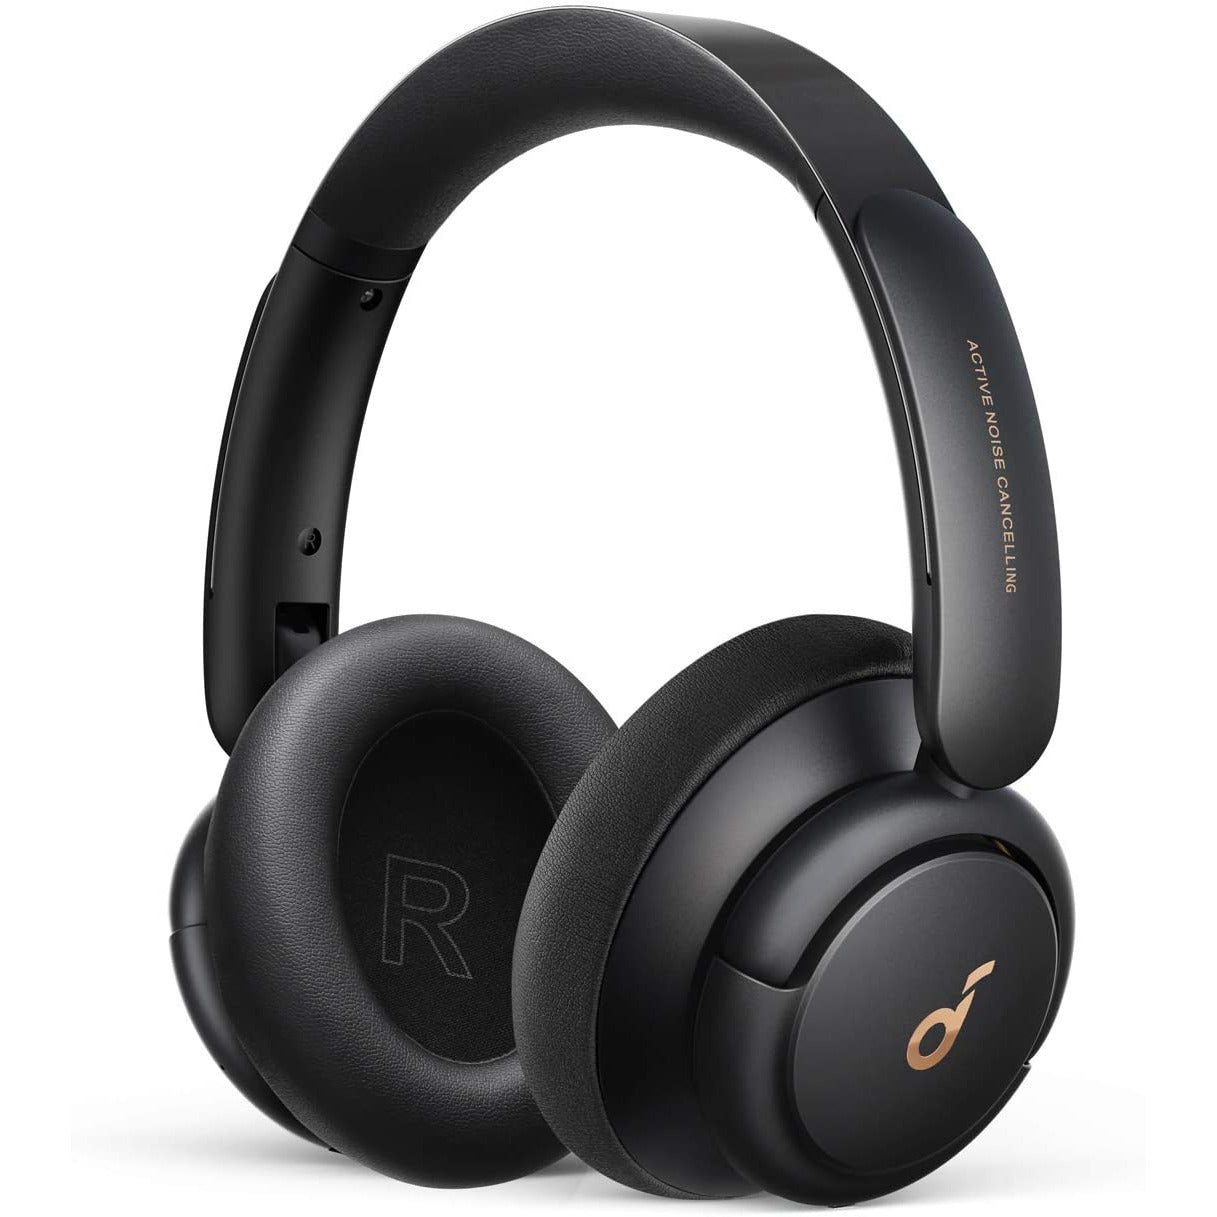 Anker A3028H11 Soundcore Life Q30 Bluetooth Wireless Headphones with Active Noise Cancelling